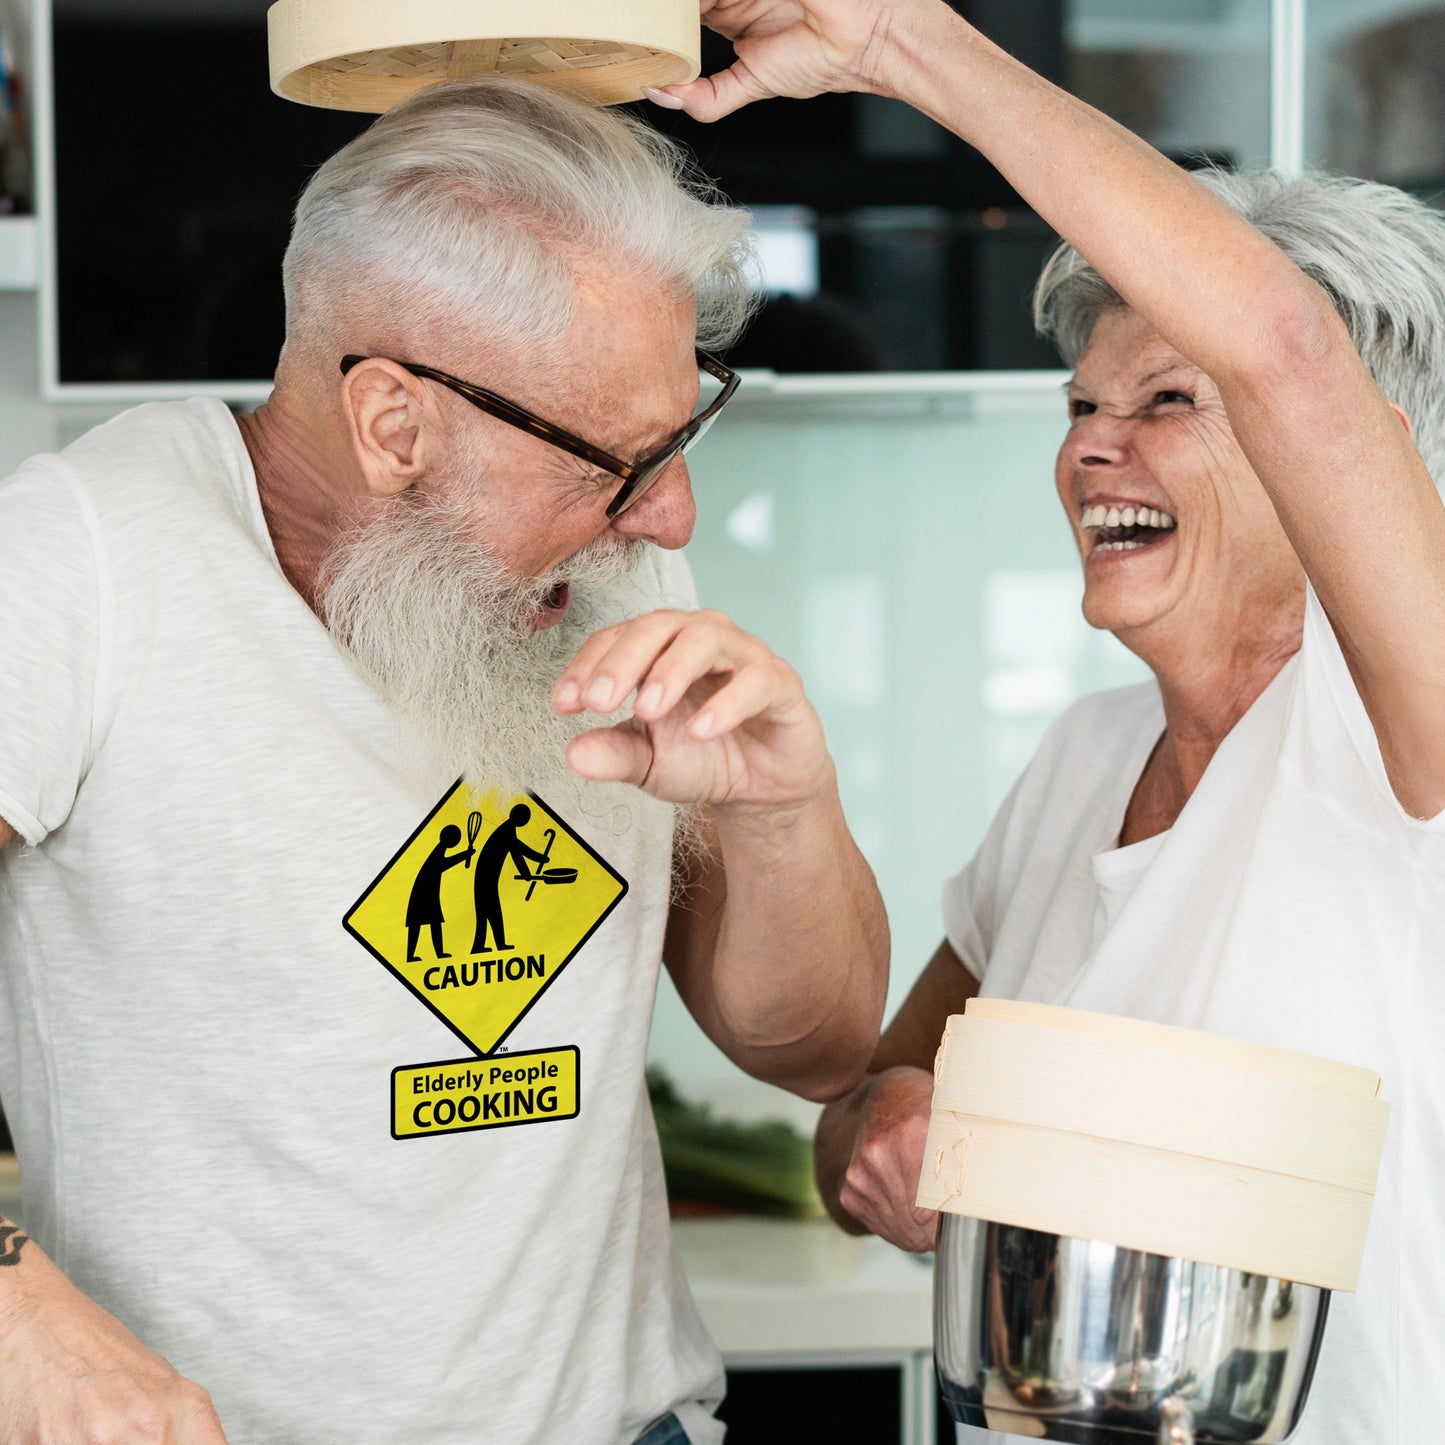 Caution: Elderly People COOKING T-shirt